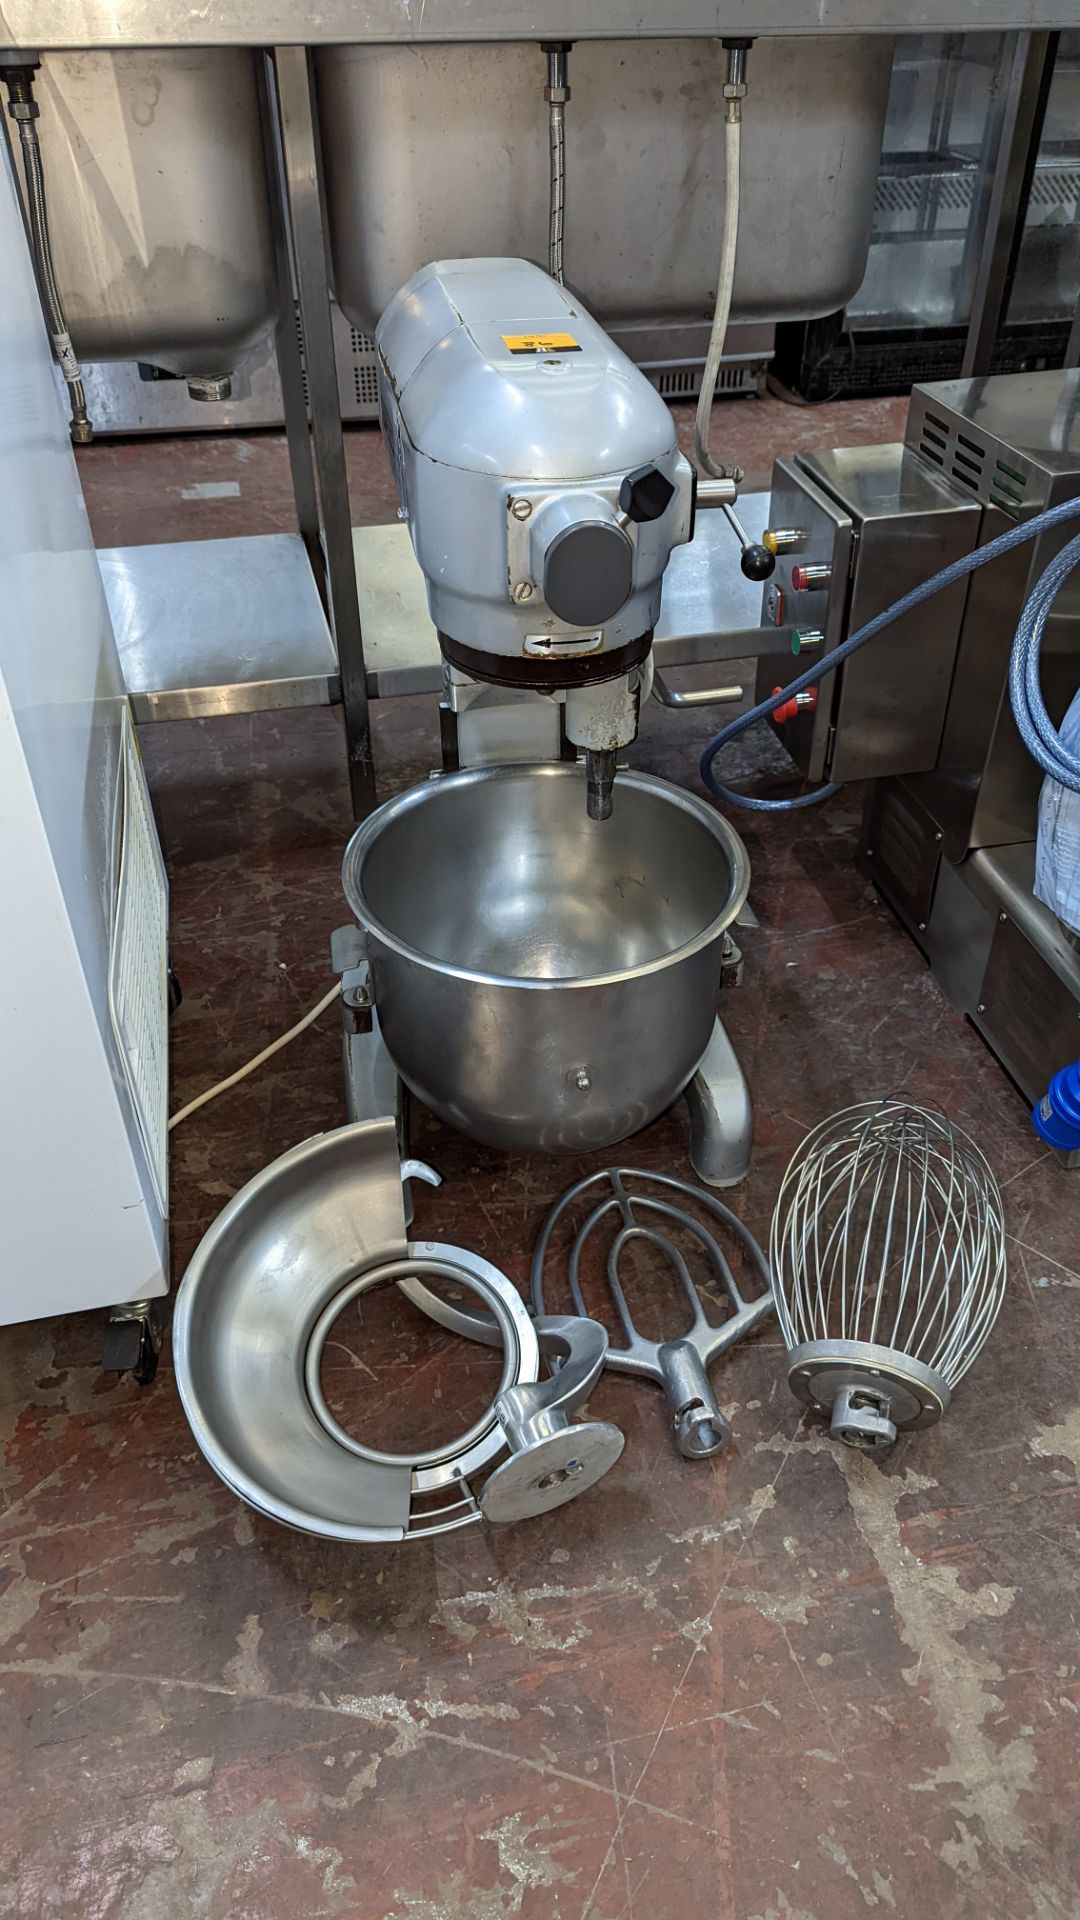 Hobart commercial mixer incorporating removable bowl, guard & 3 assorted paddle/mixer attachments